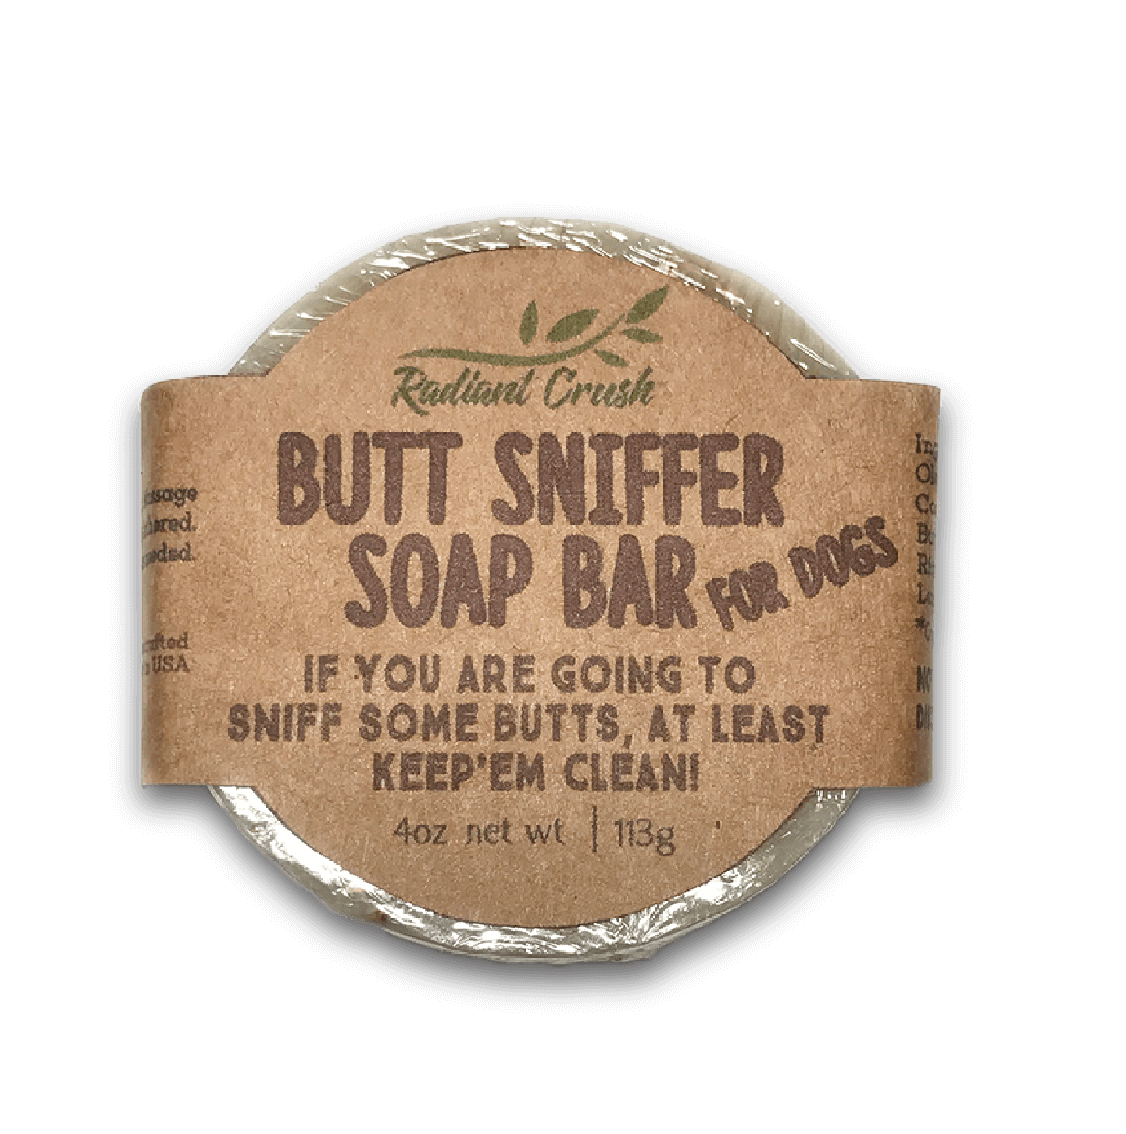 Butt Sniffer Shampoo Bar For Dogs - Radiant Crush